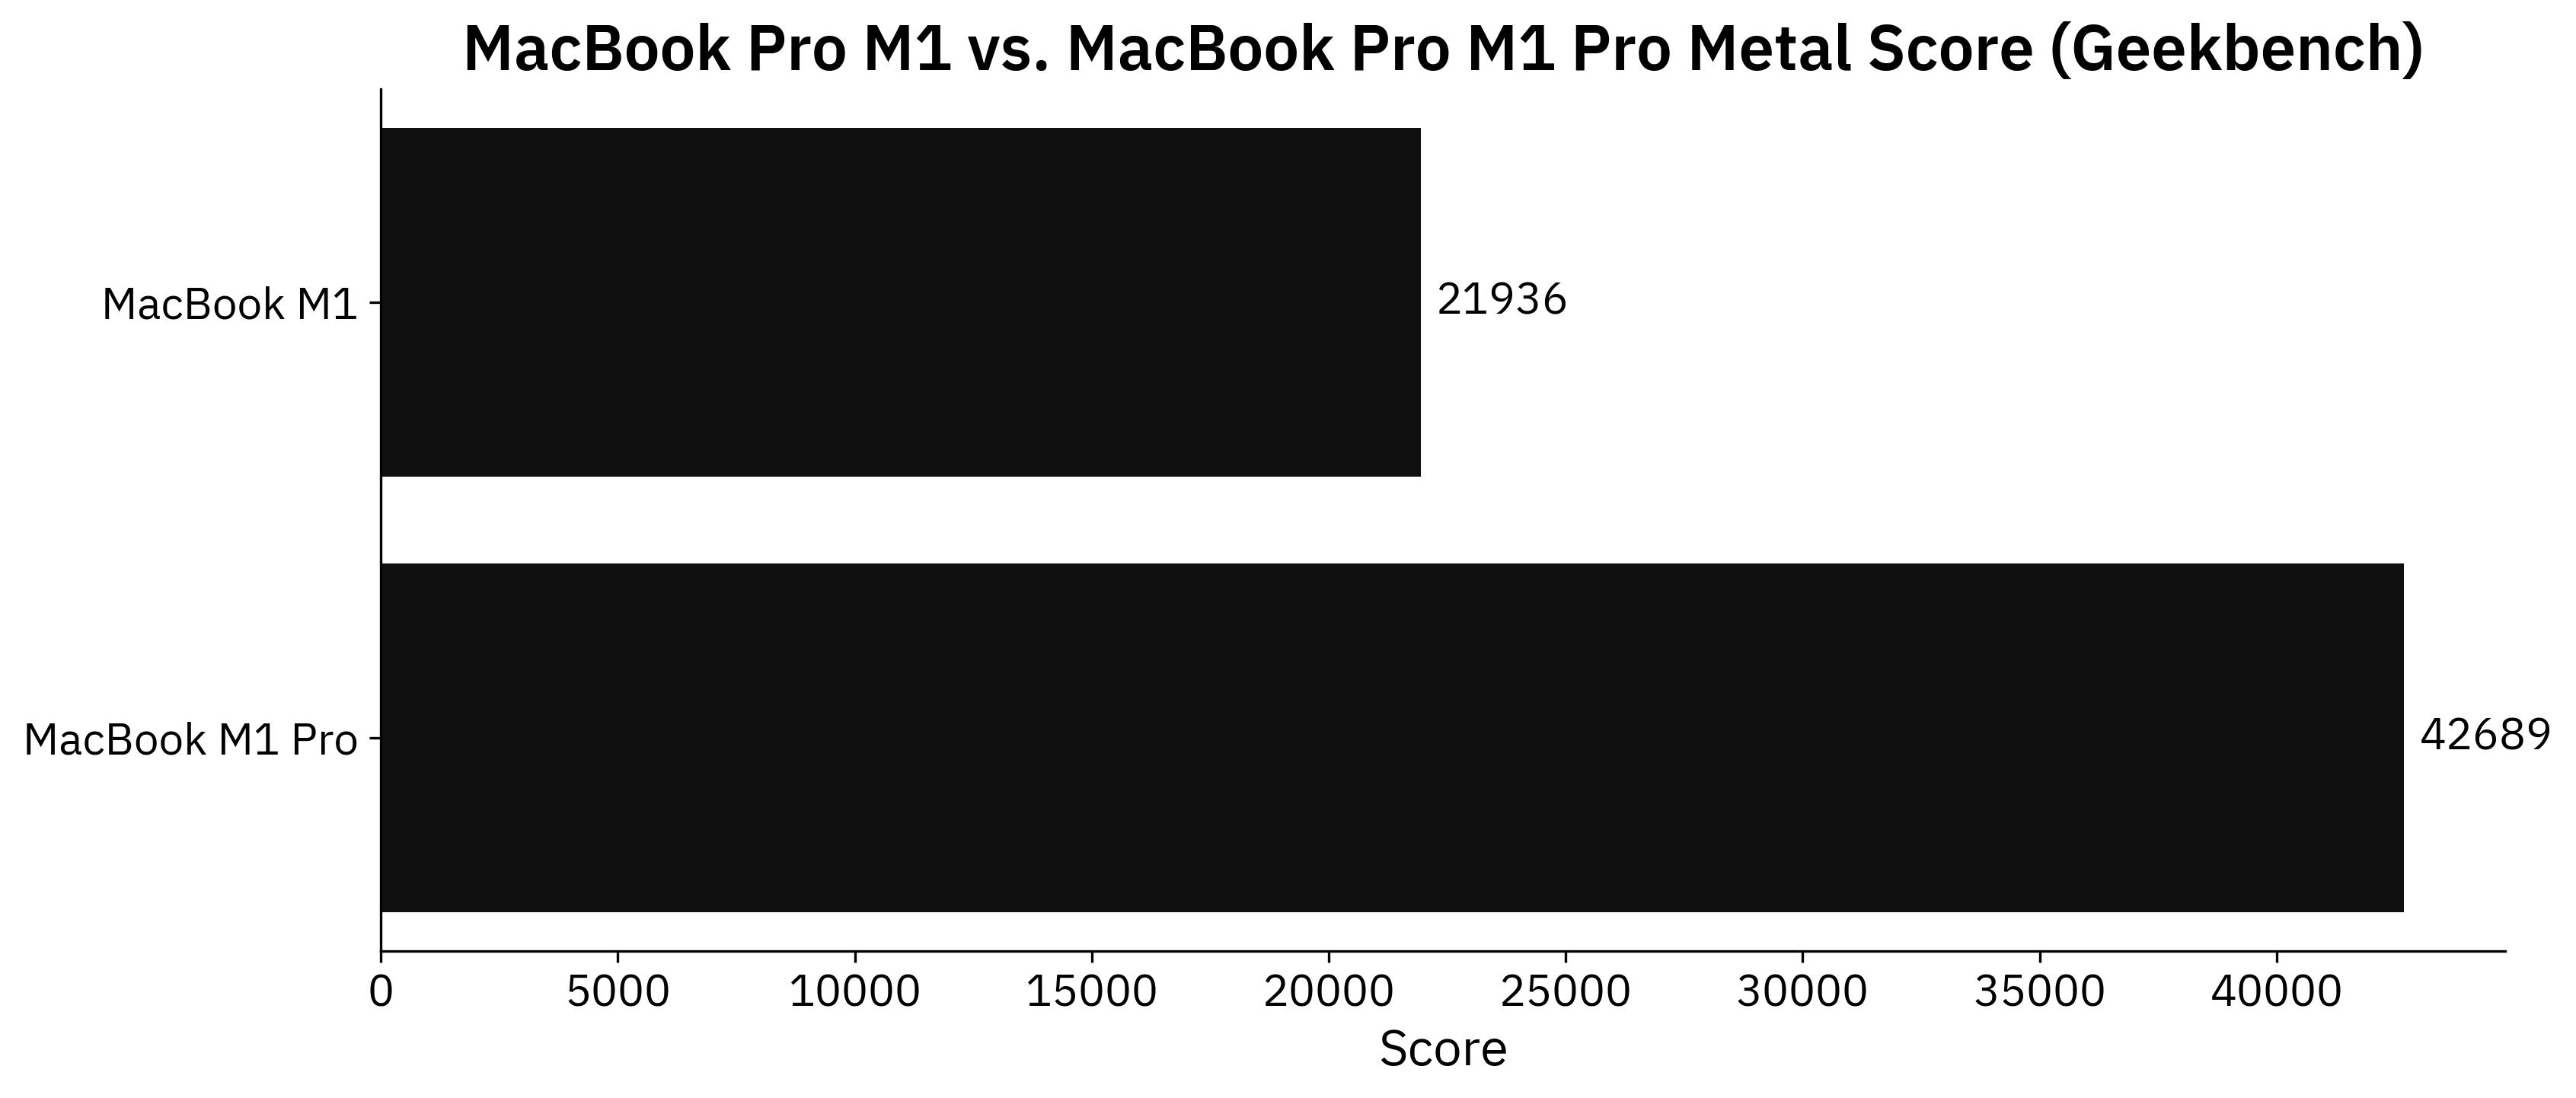 Image 4 - Geekbench Metal performance (image by author)